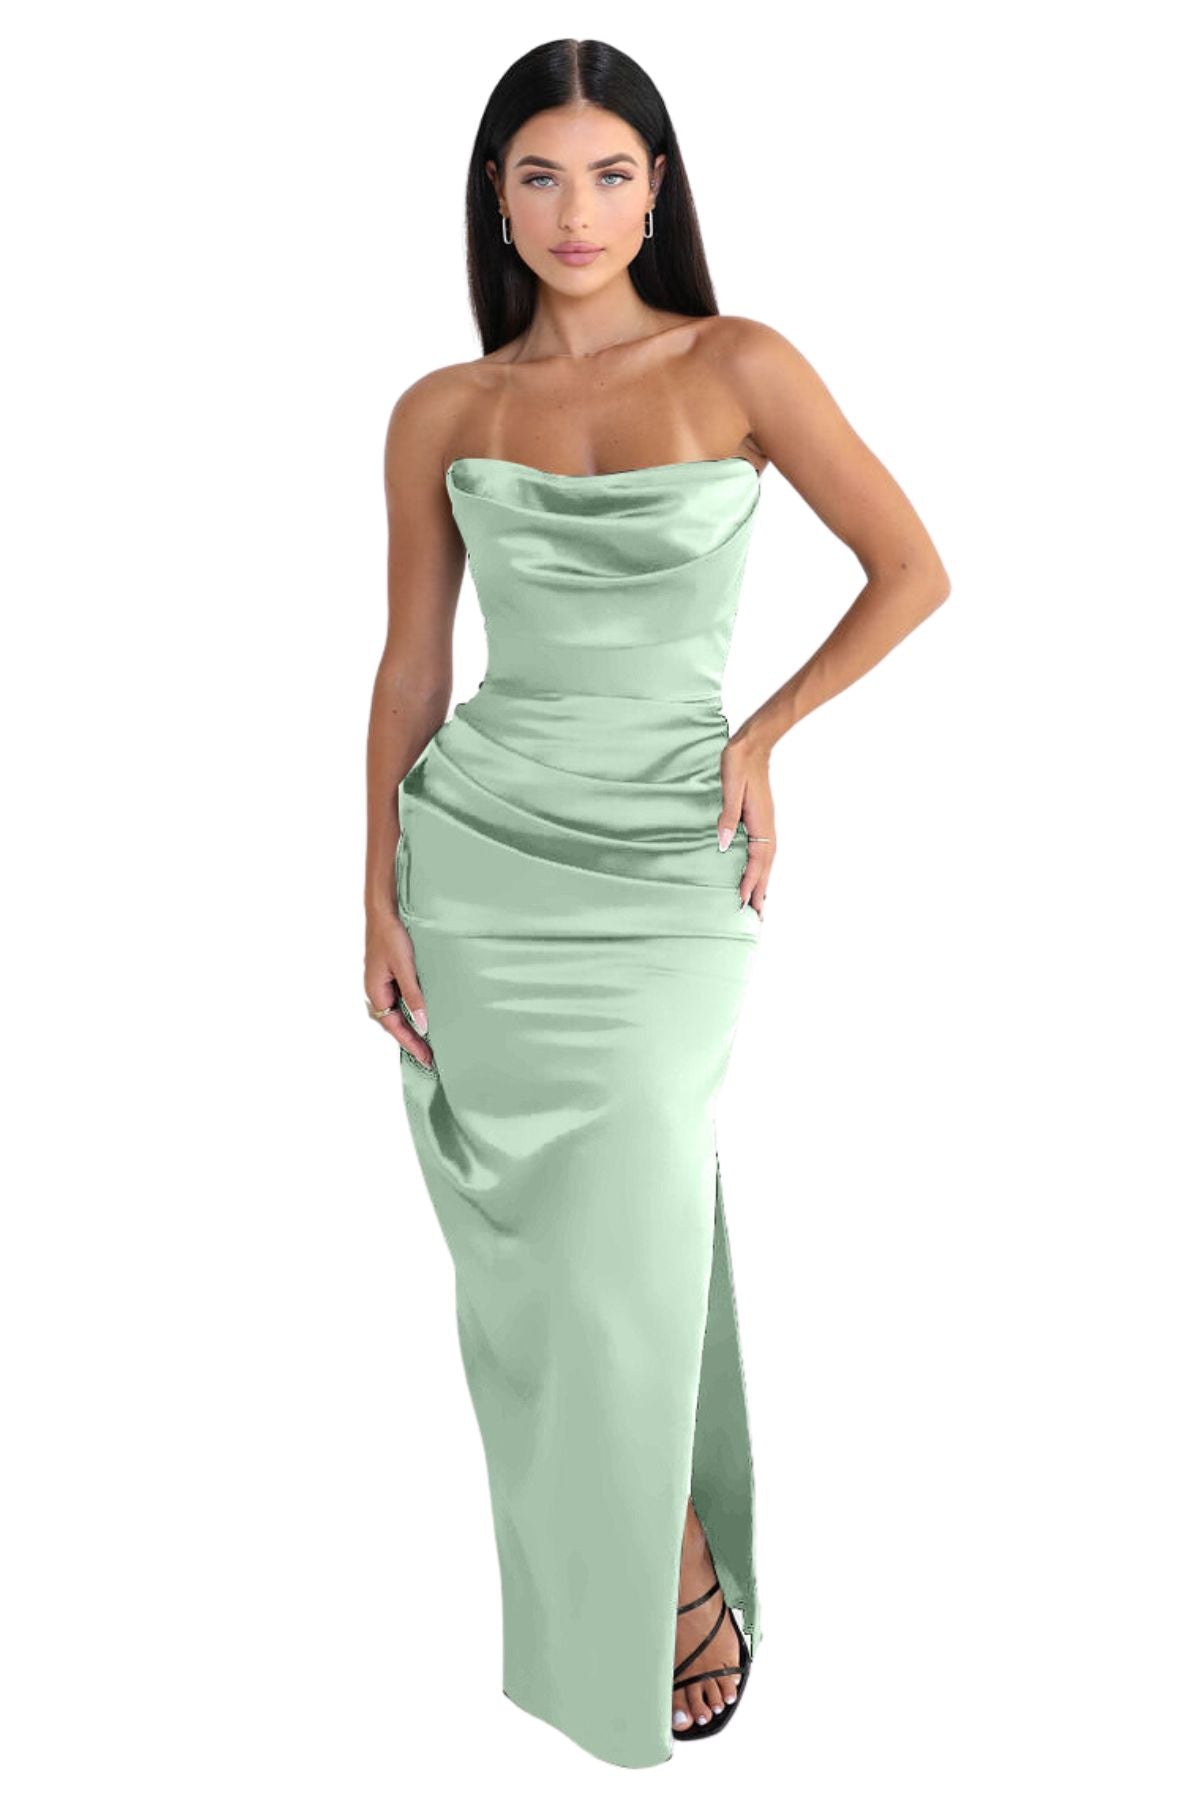 HOUSE OF CB Adrienne Corset Maxi (Sage Green)